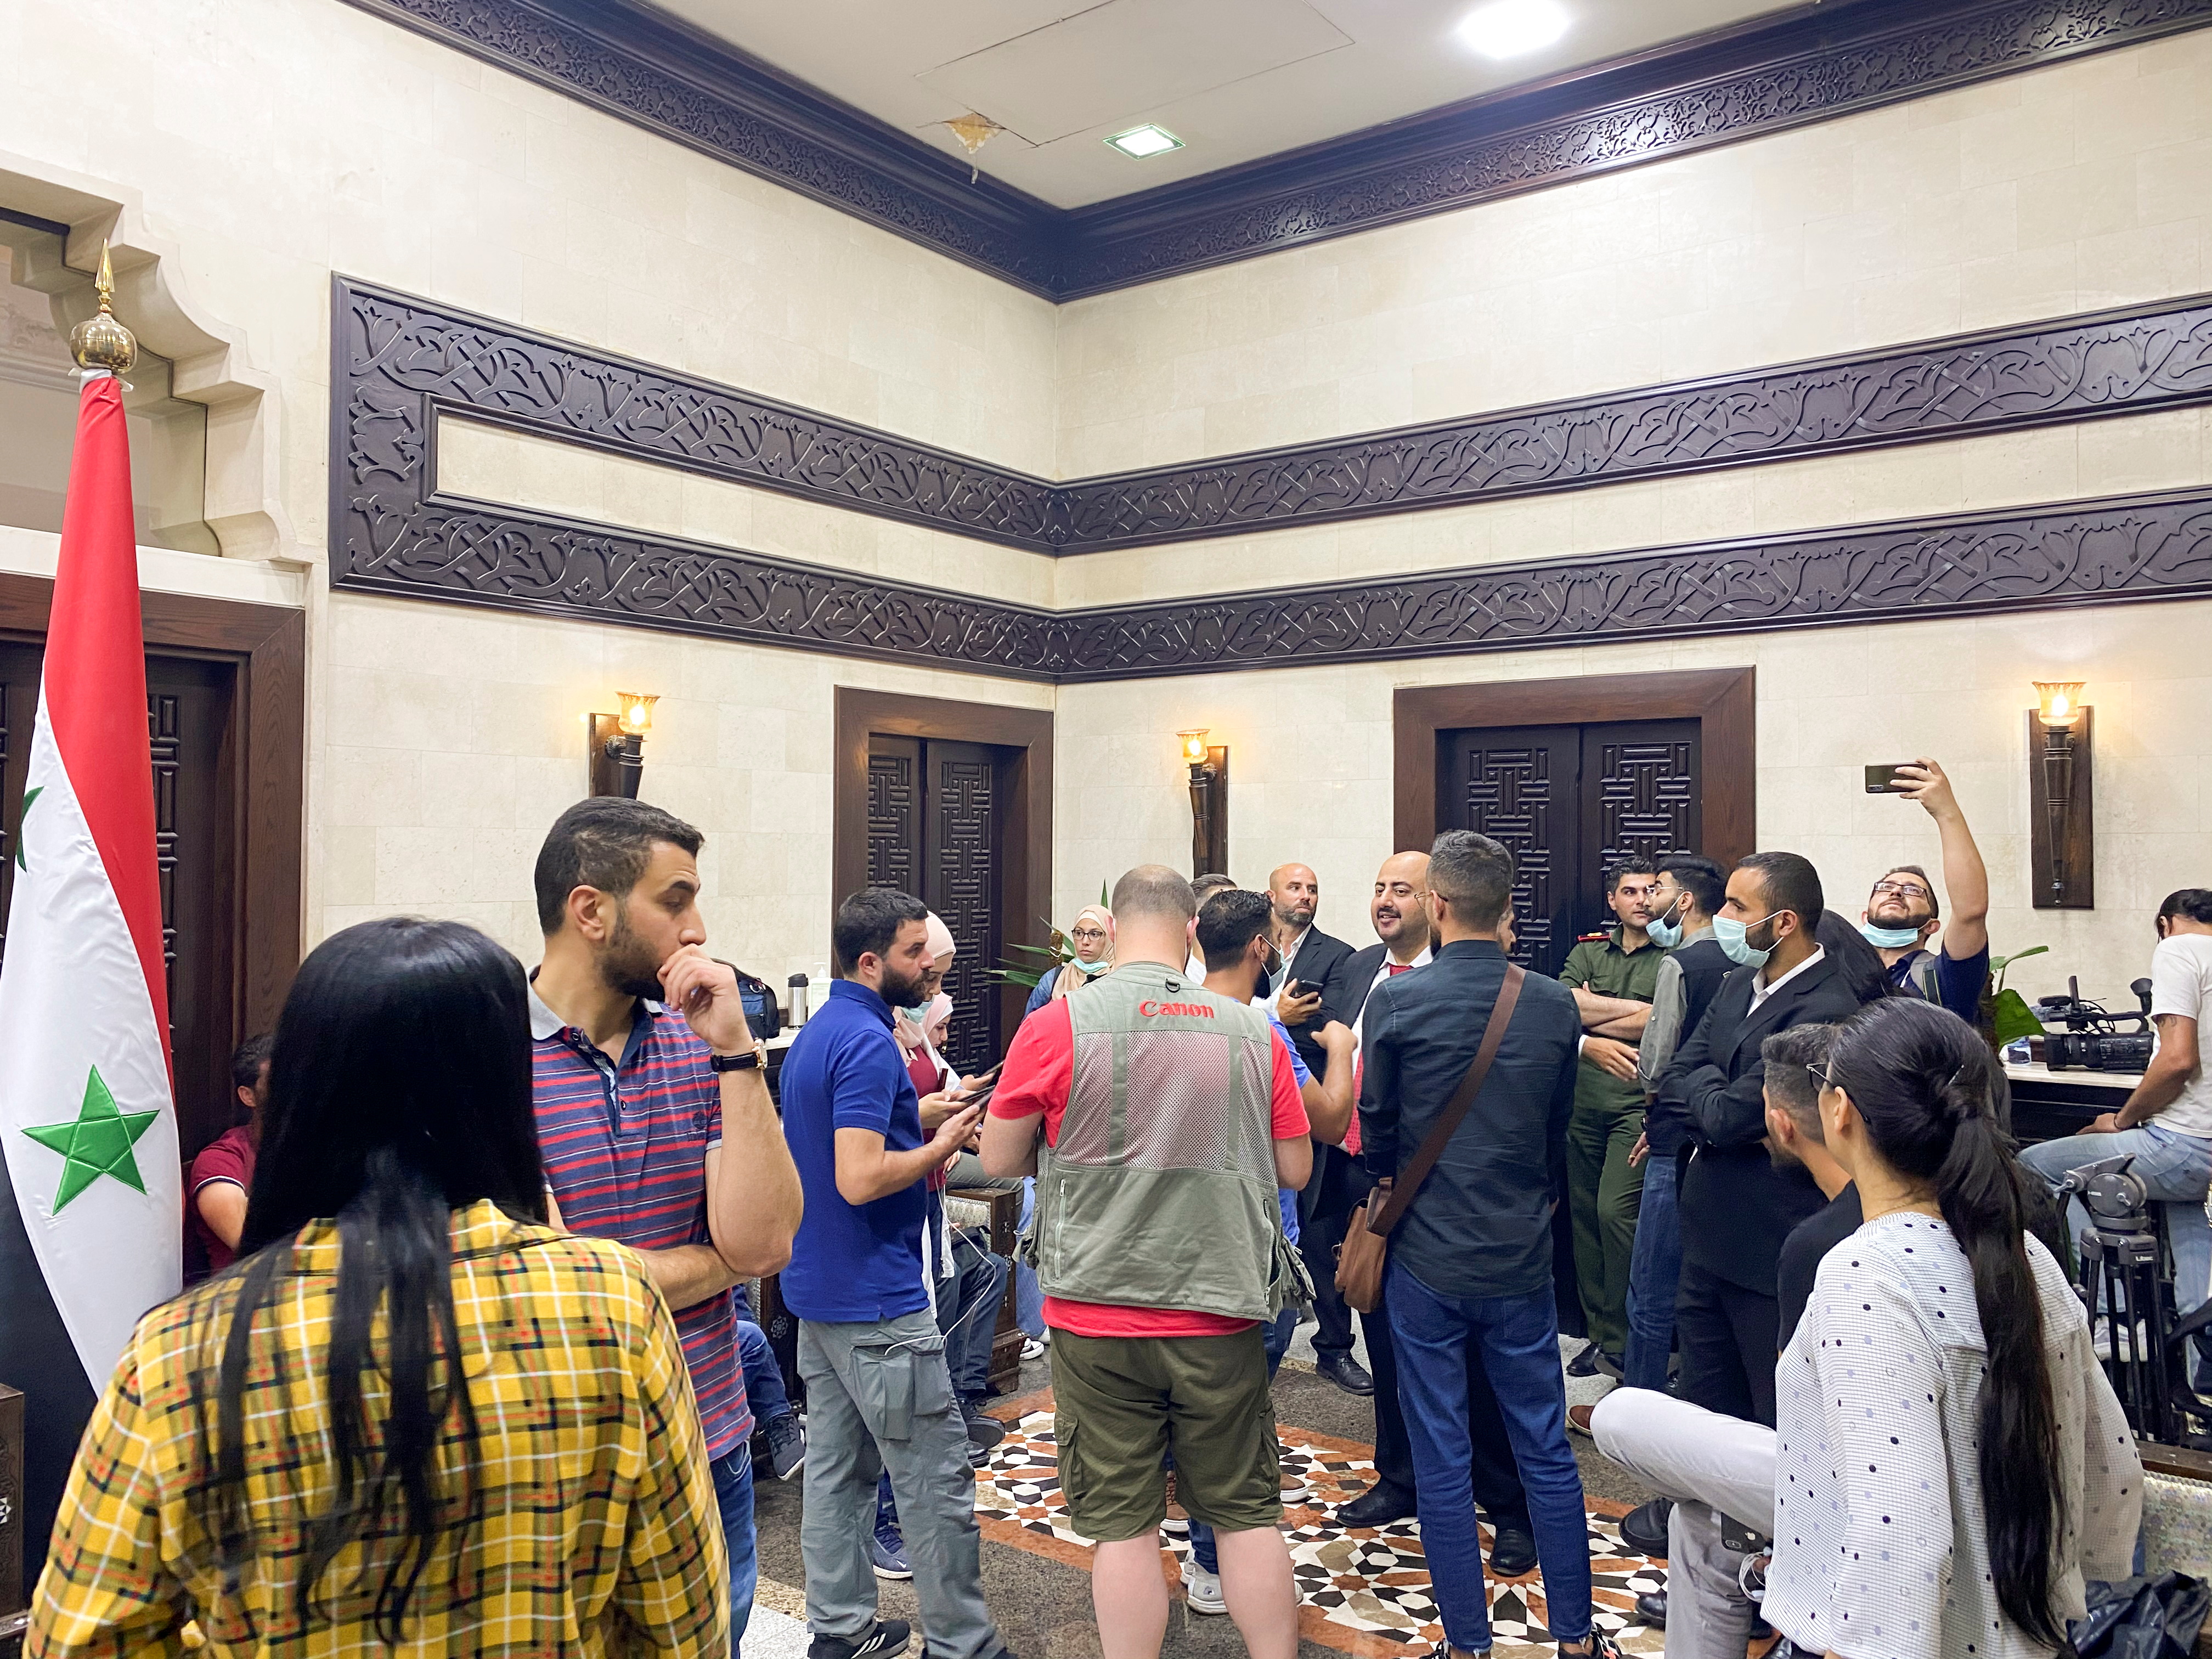 Journalists wait in a hall before the announcement of the Syrian presidential election results, at the Syrian parliament building in Damascus